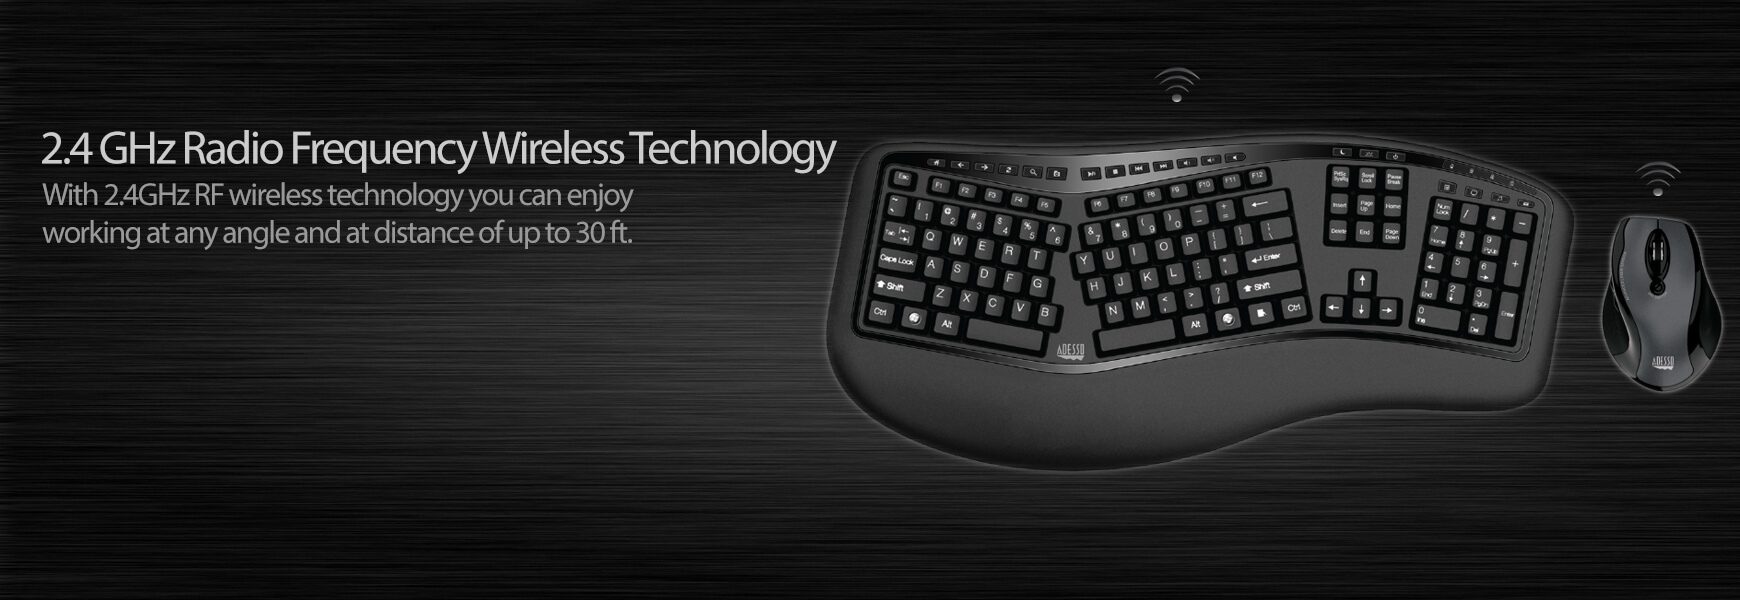 Mechanical Type Keyboard -The perfect keyboard for users that love efficiency with a retro design.